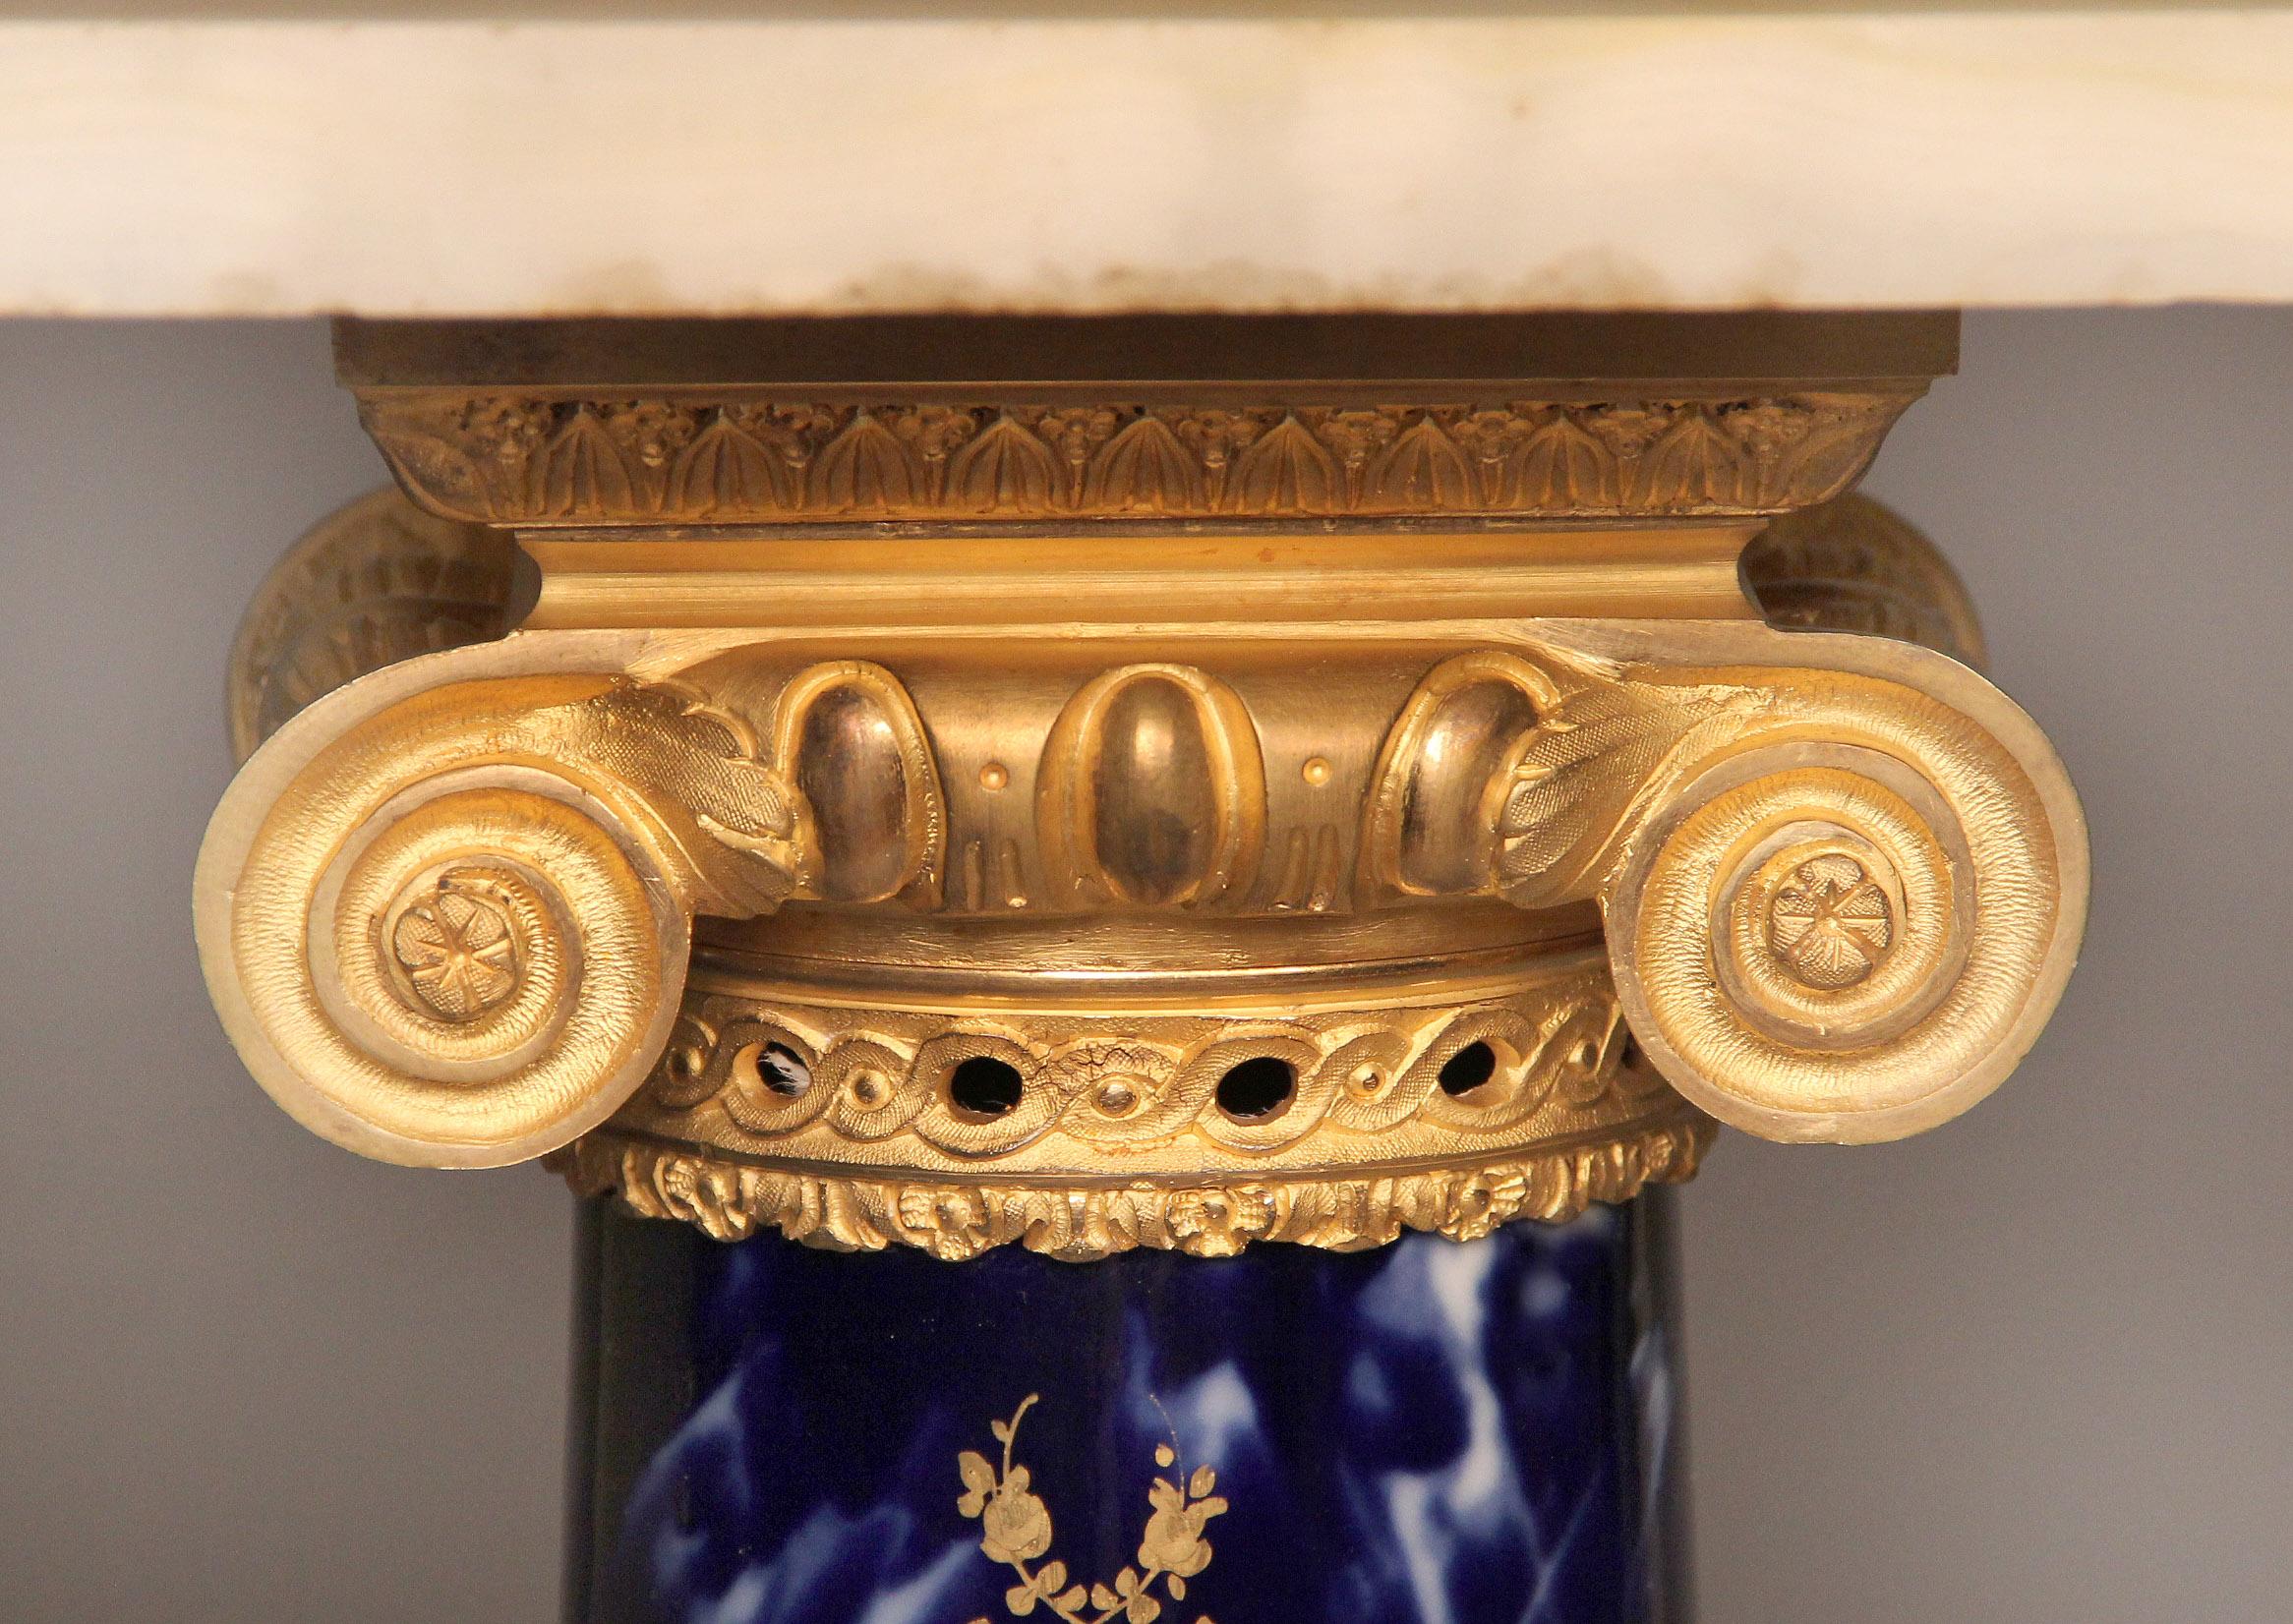 Fantastic Late 19th Century Gilt Bronze Mounted Onyx and Sèvres Style Pedestal For Sale 2